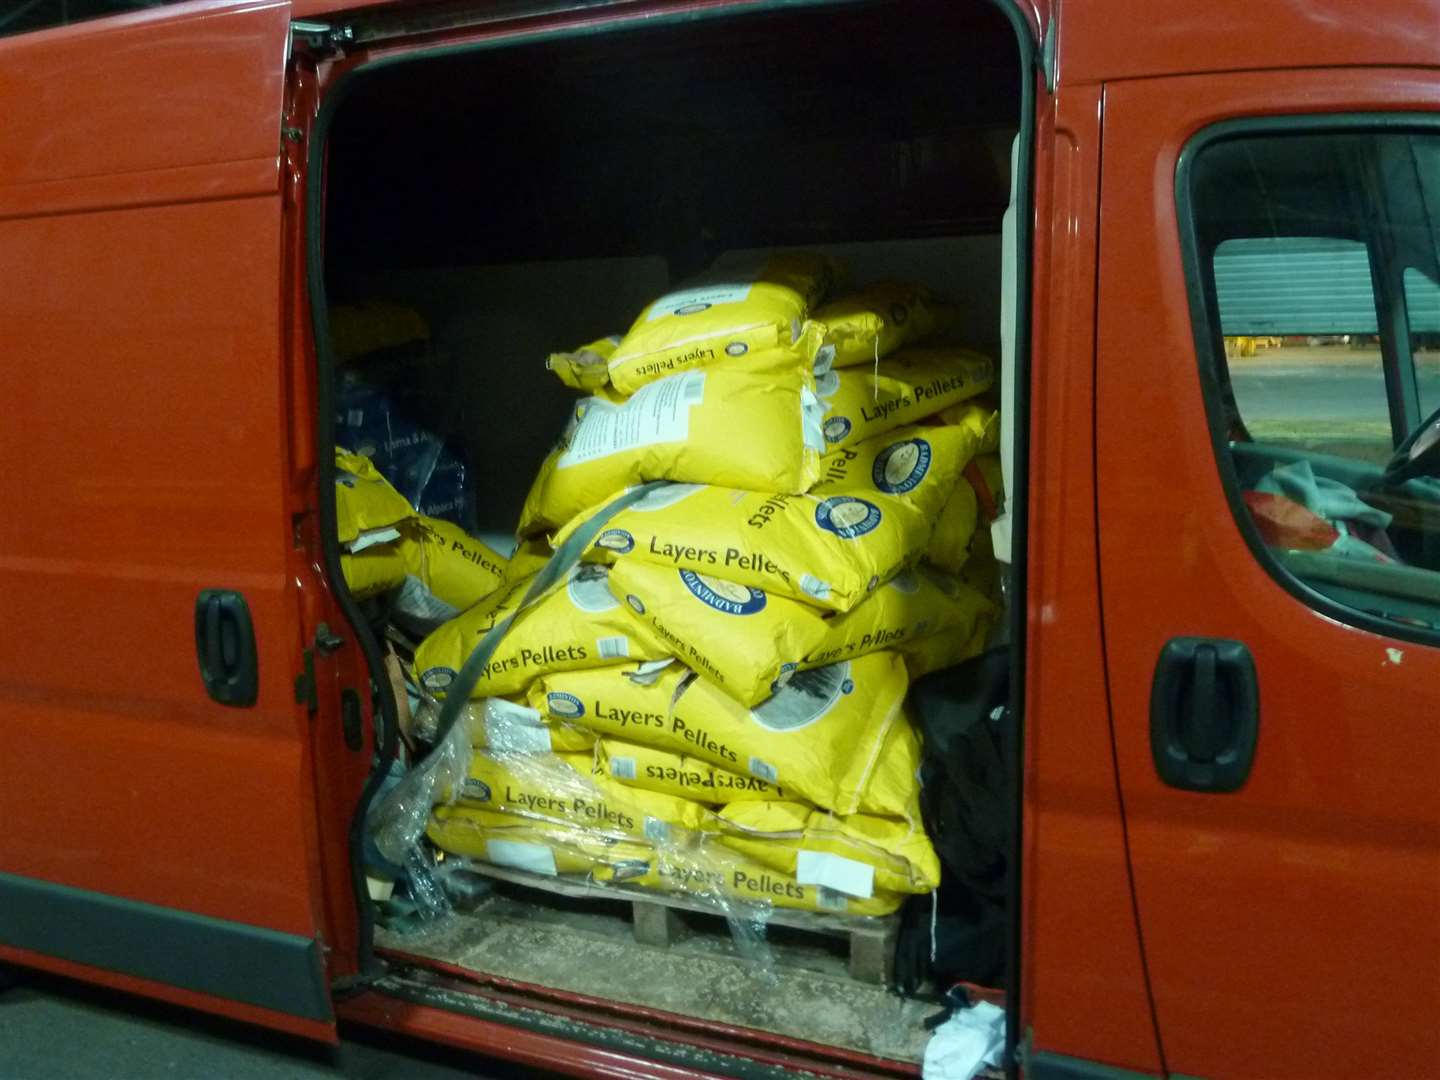 Sack of feed. All pics credit: National Crime Agency